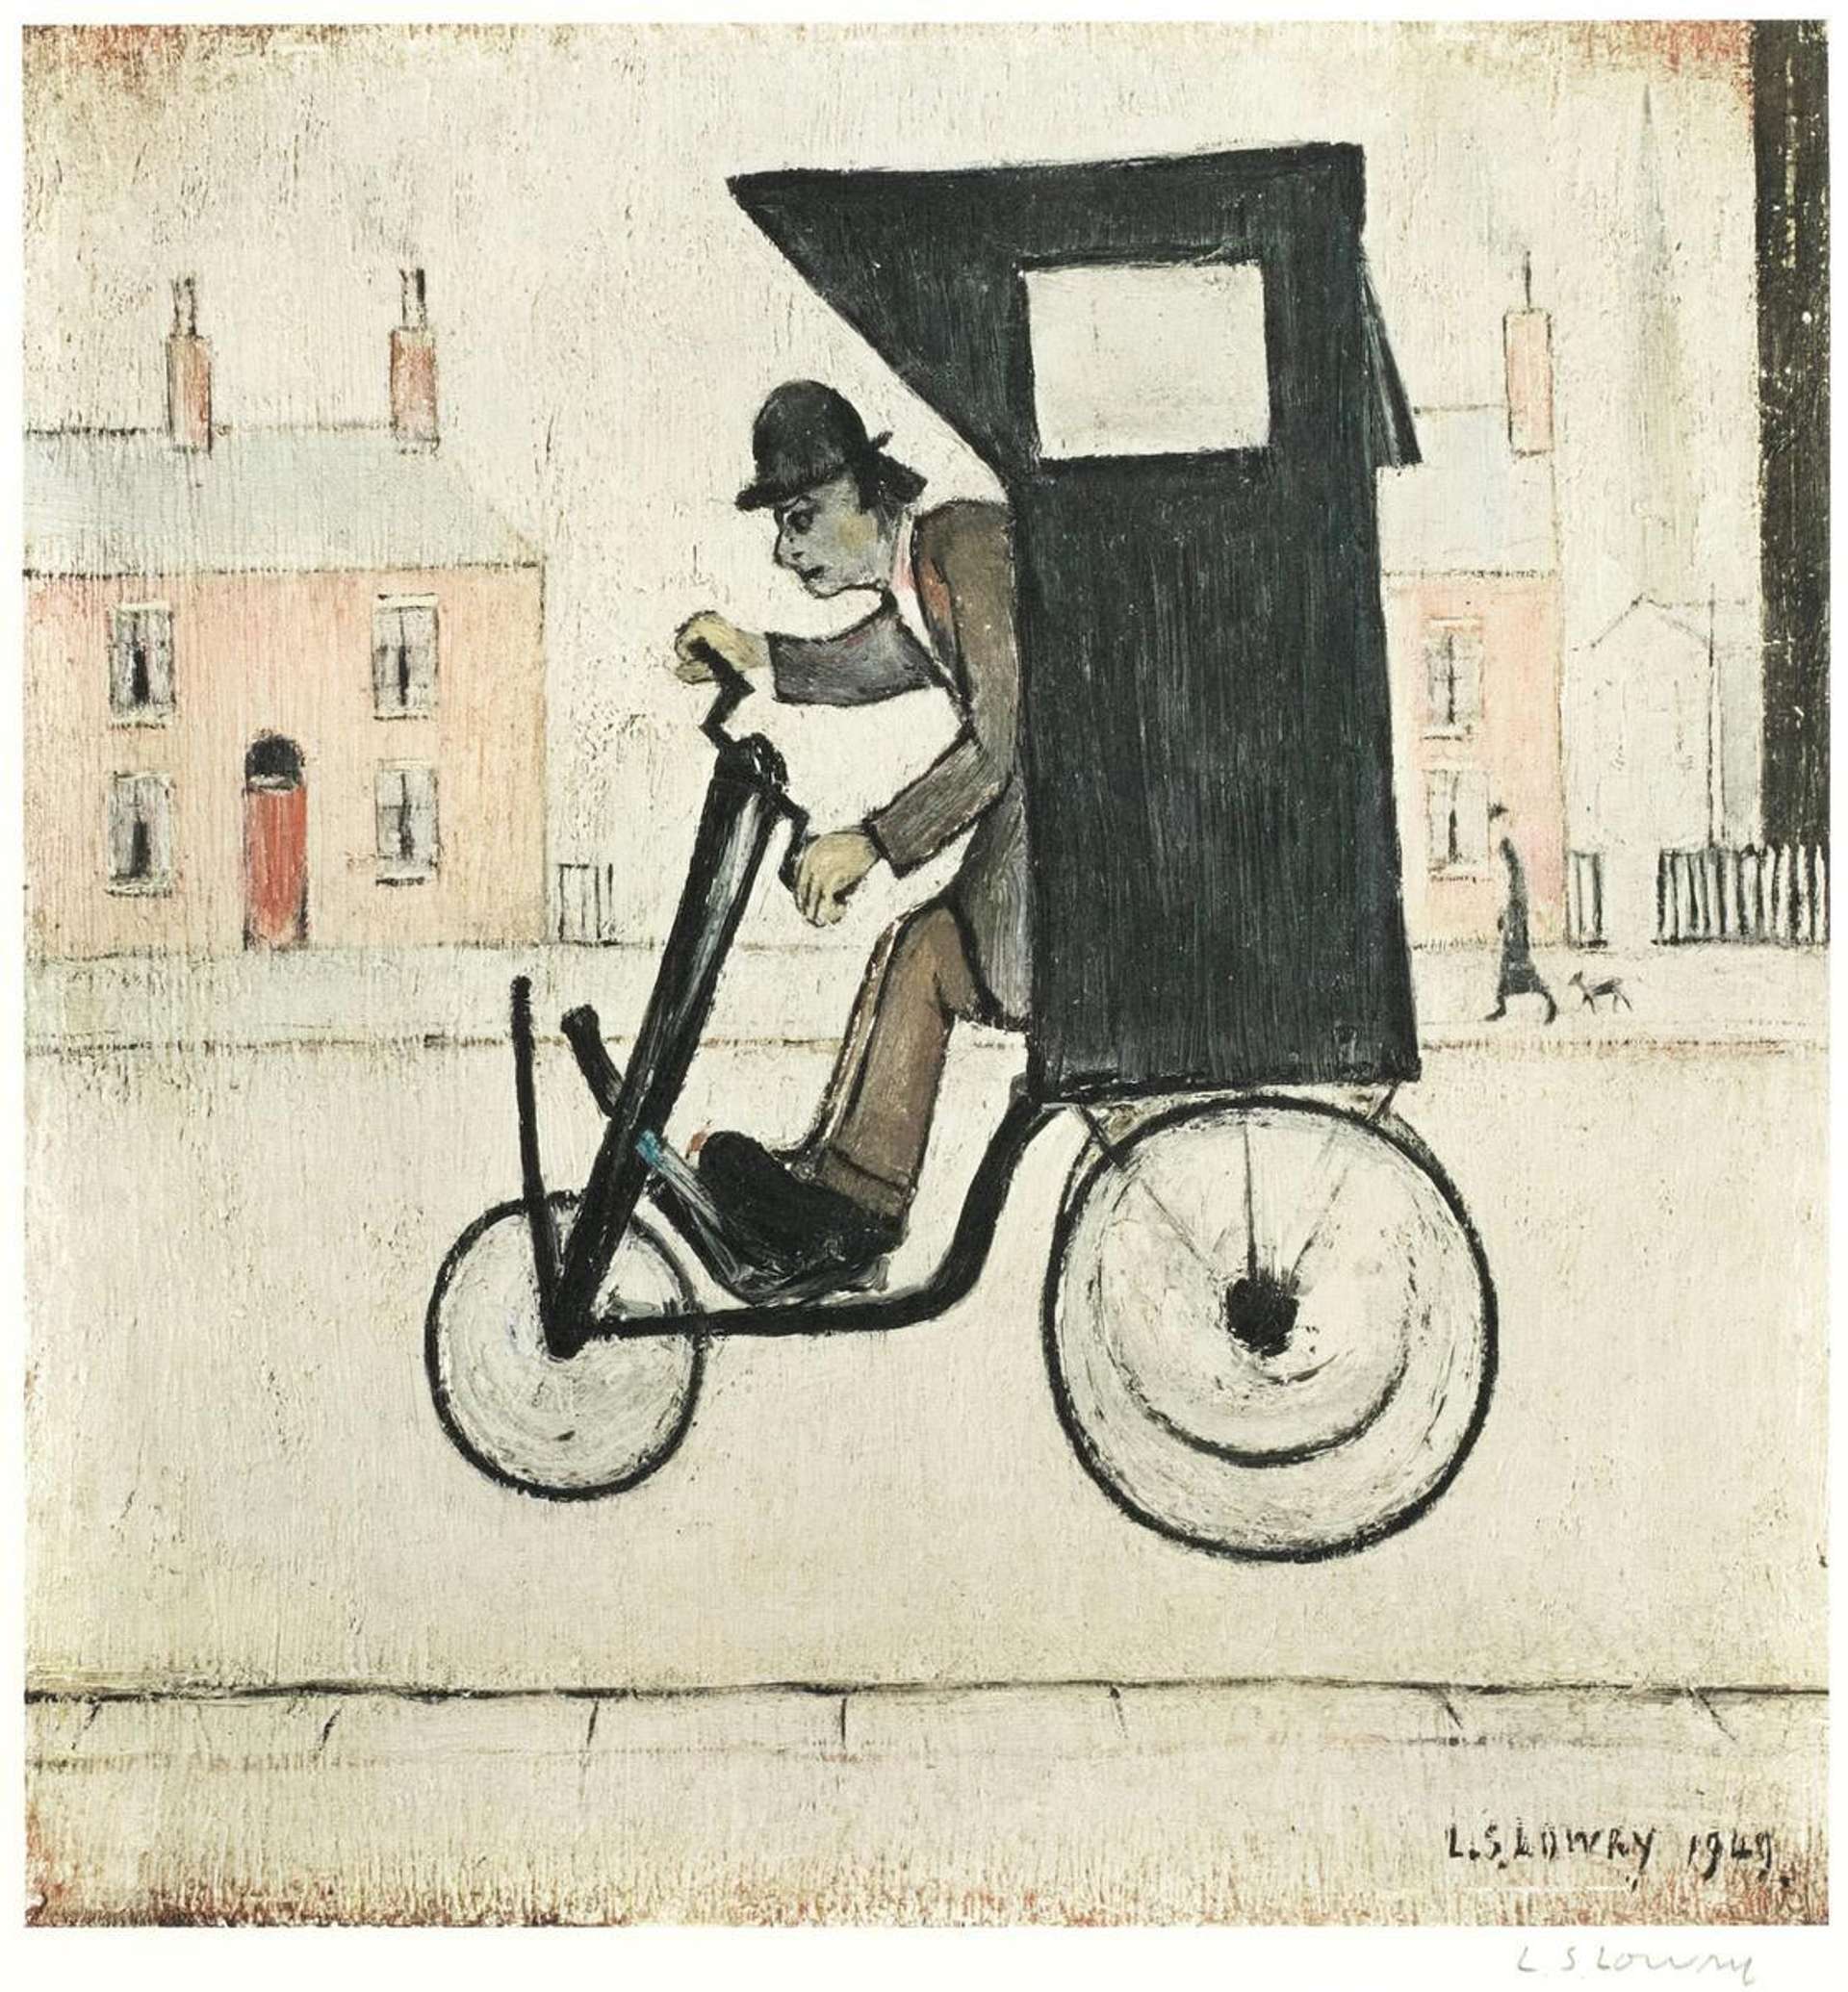 L.S. Lowry’s The Contraption. A lithograph of a man leaning forward driving an early model automobile on a local street with buildings in the background. 